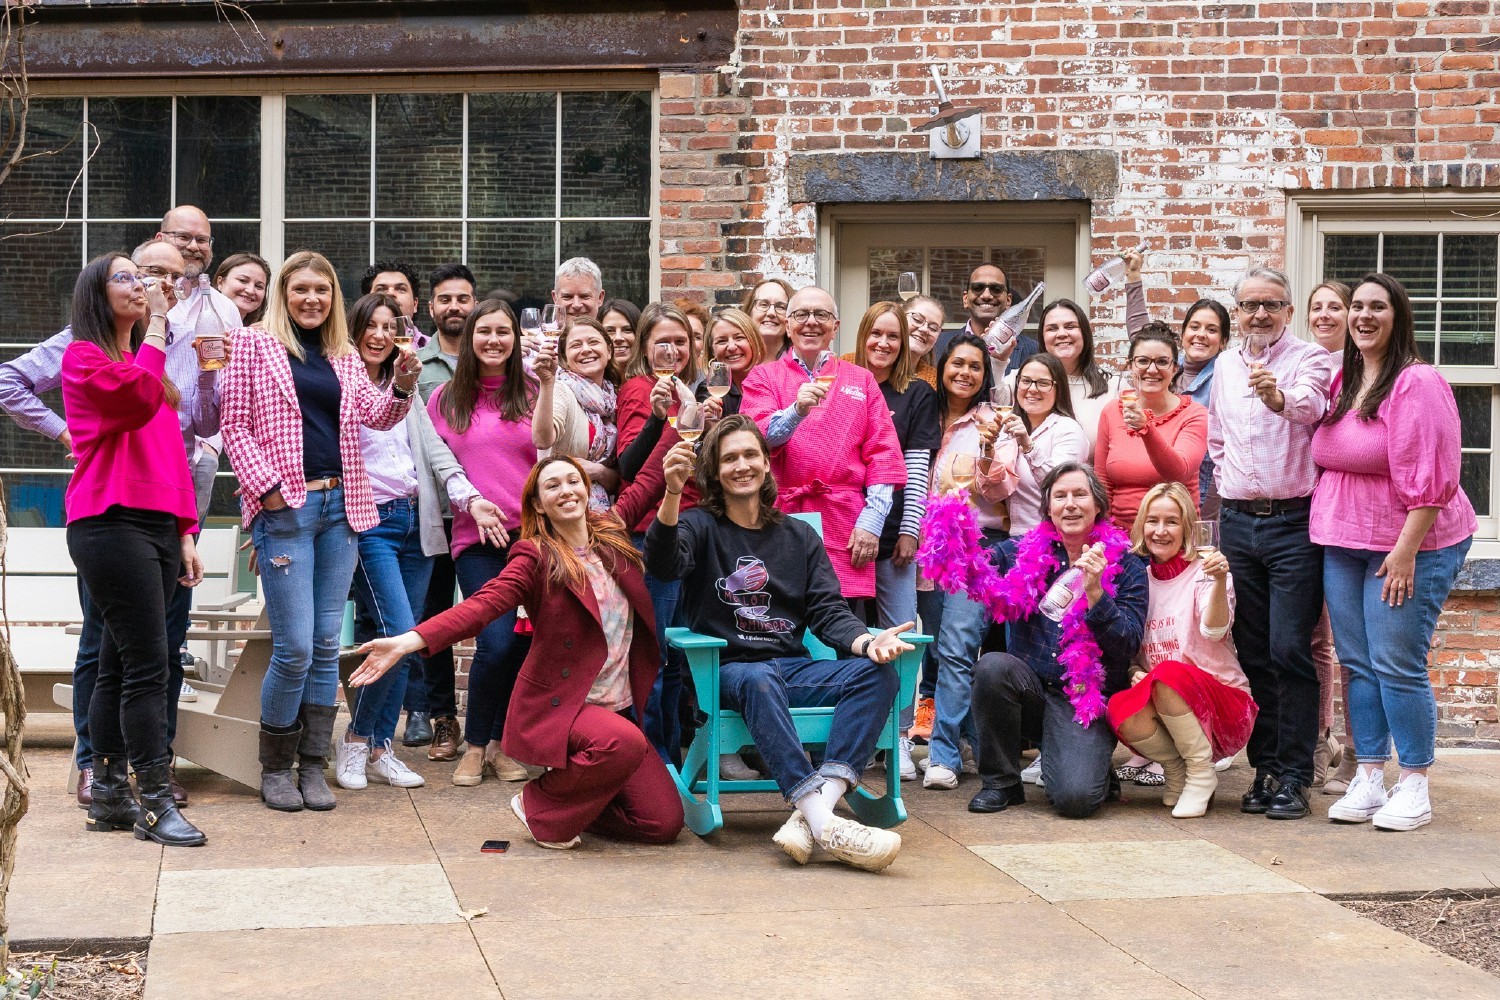 The team celebrating the launch of our new partnership with pink robes and pink bubbly!